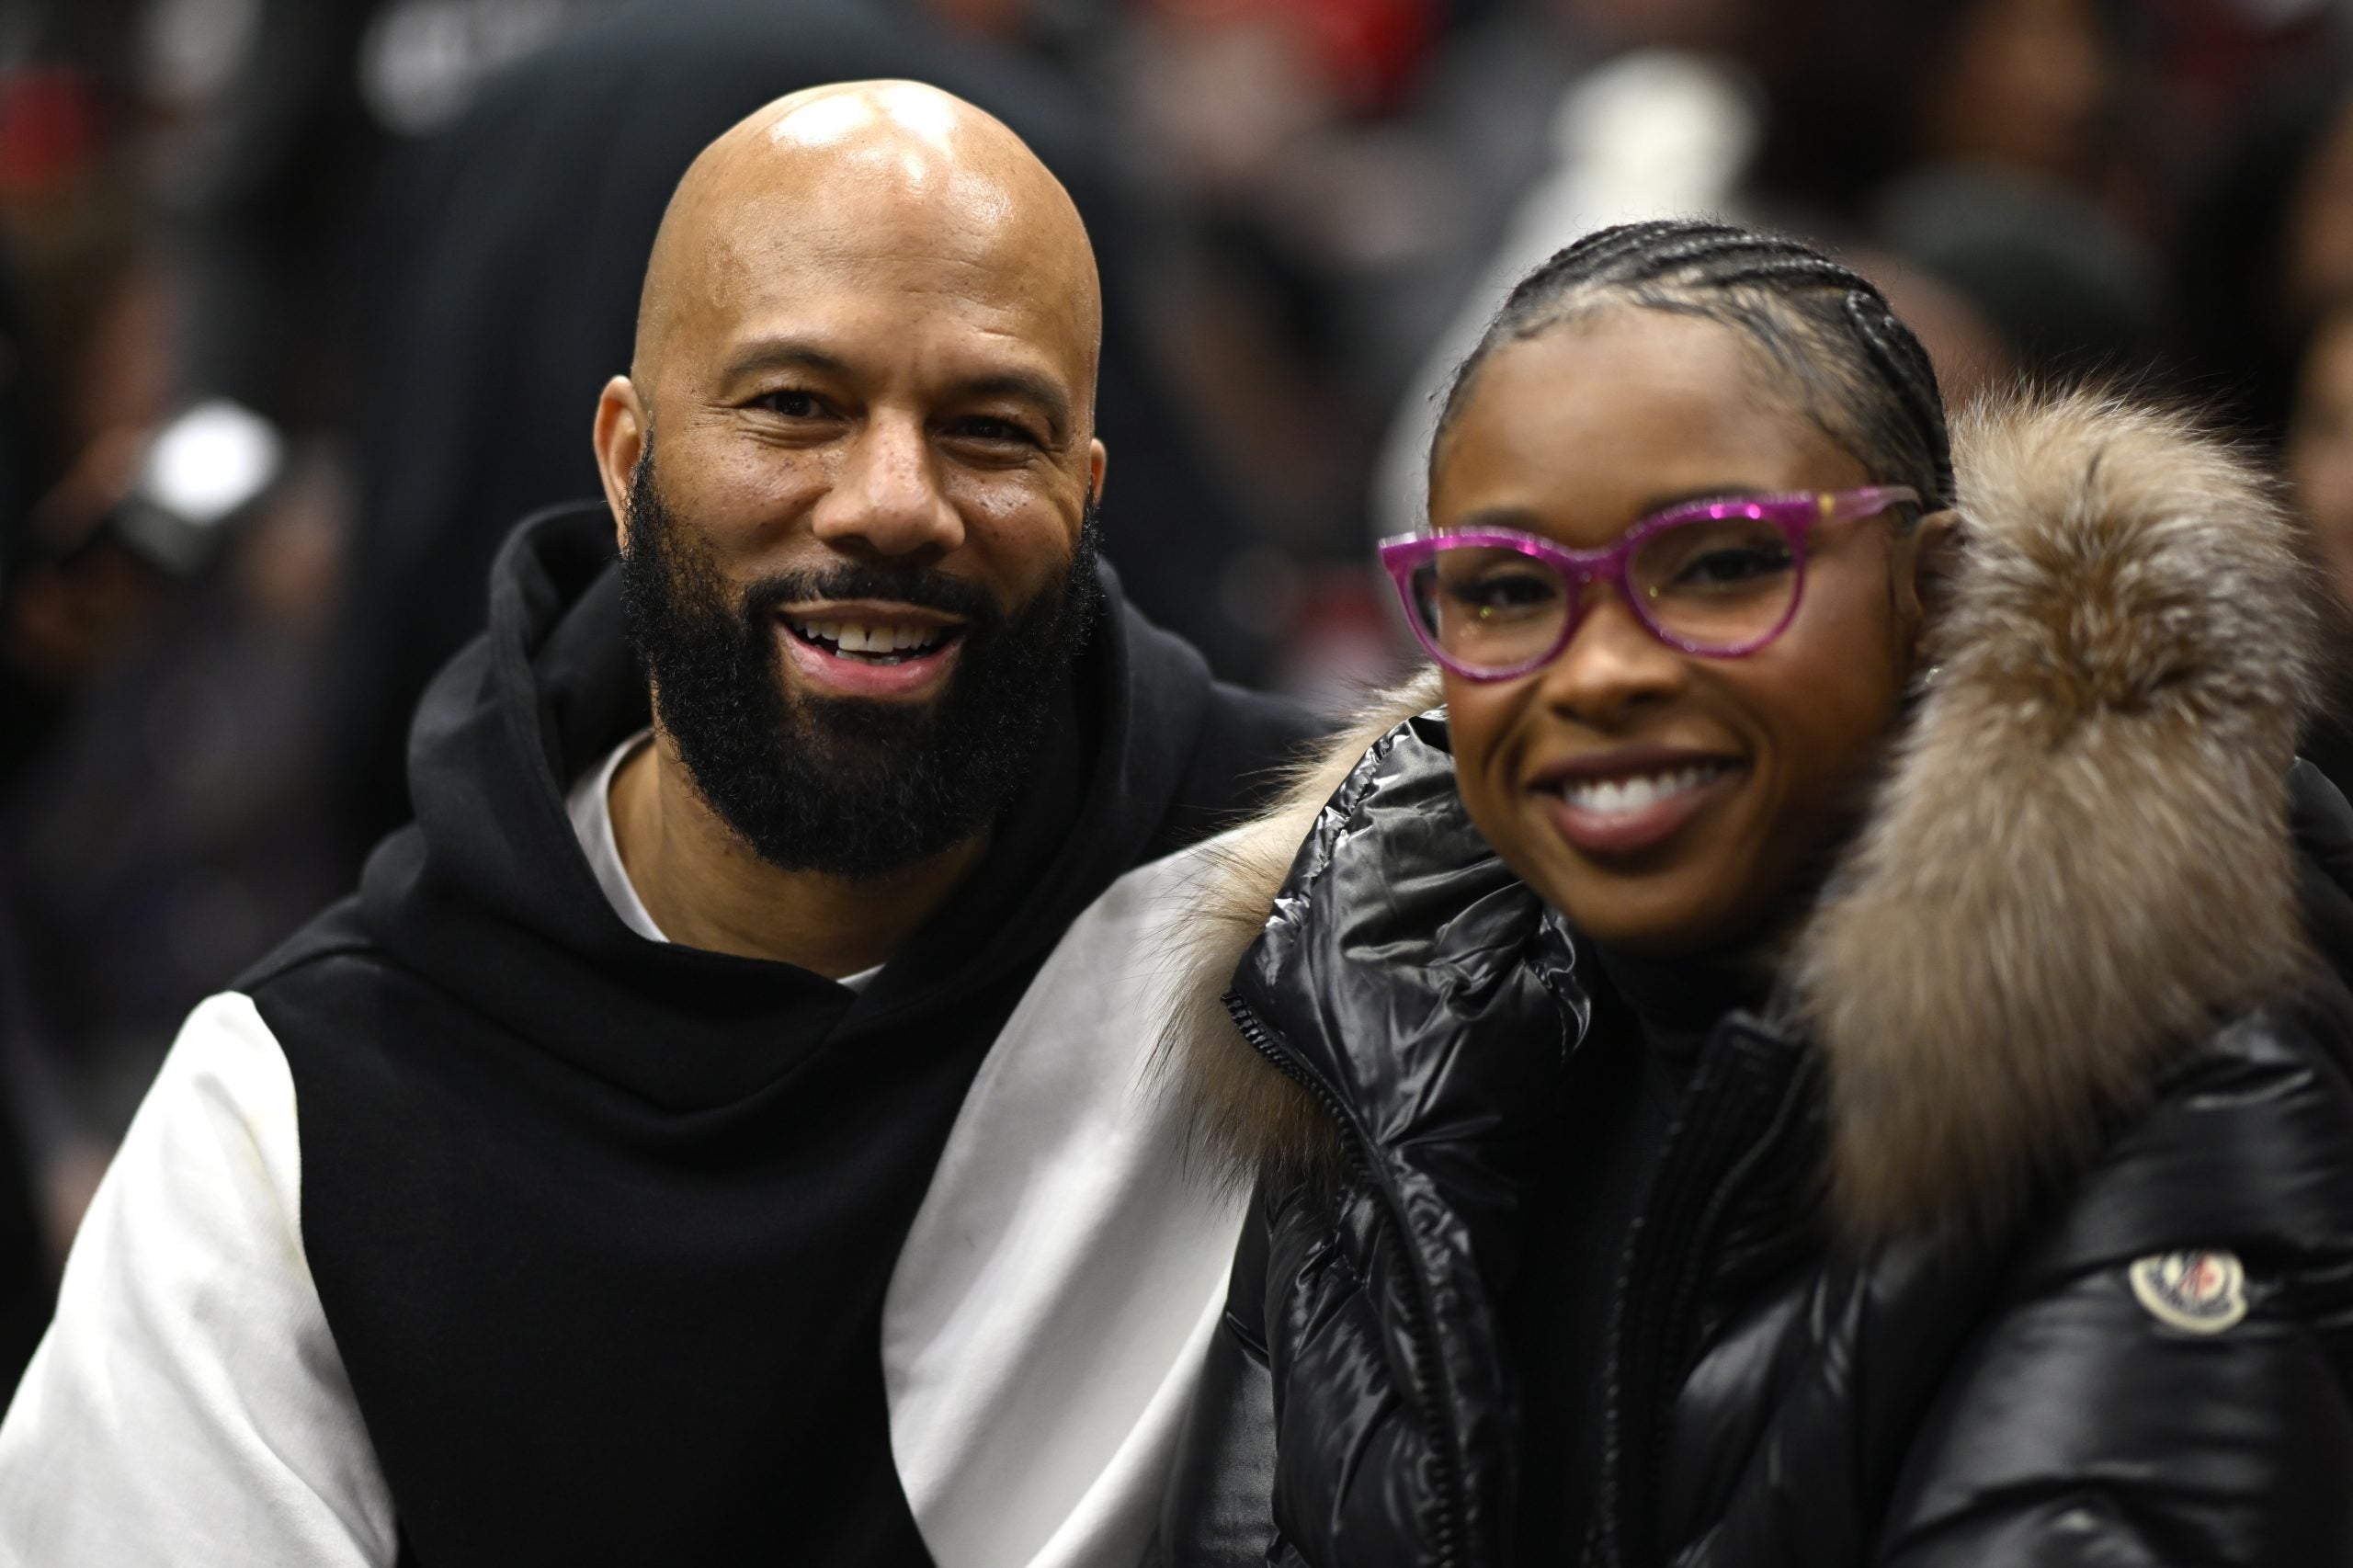 Jennifer Hudson And Common Looked Quite Cozy At A Chicago Bulls Game